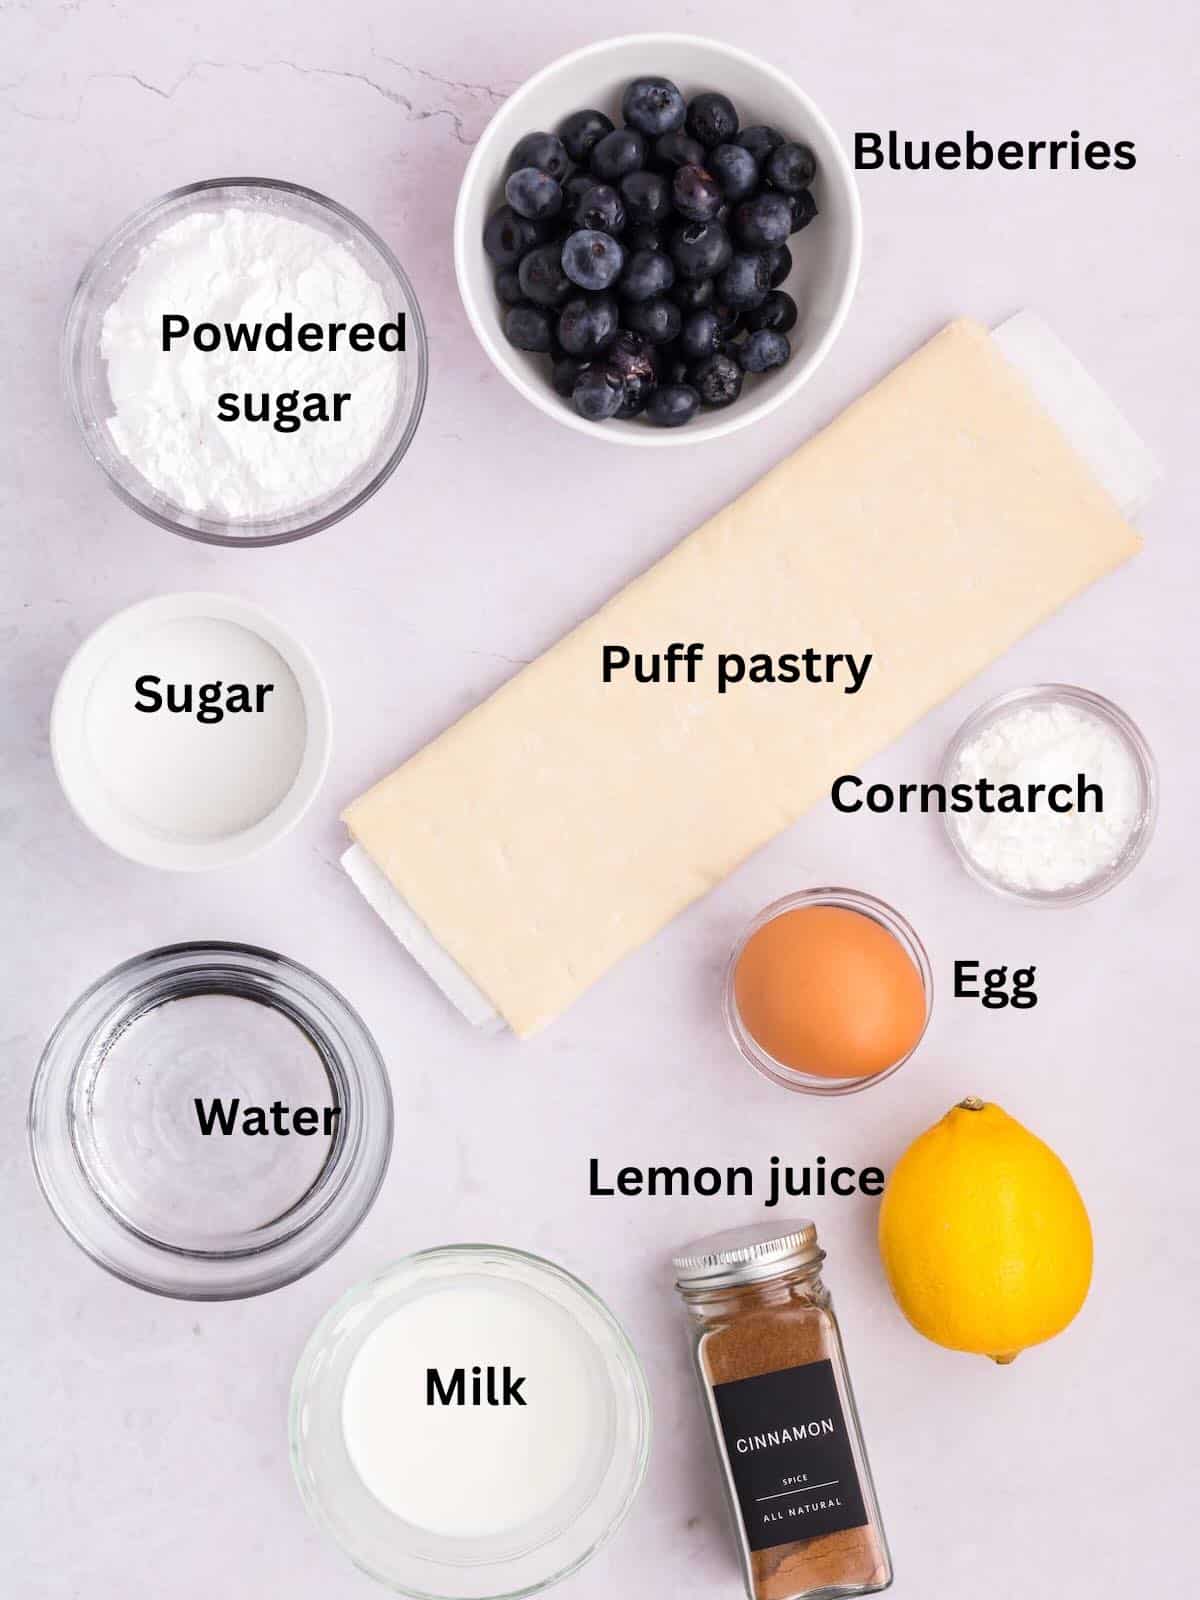 Ingredients to make blueberry turnovers including fresh blueberries and puff pastry. 